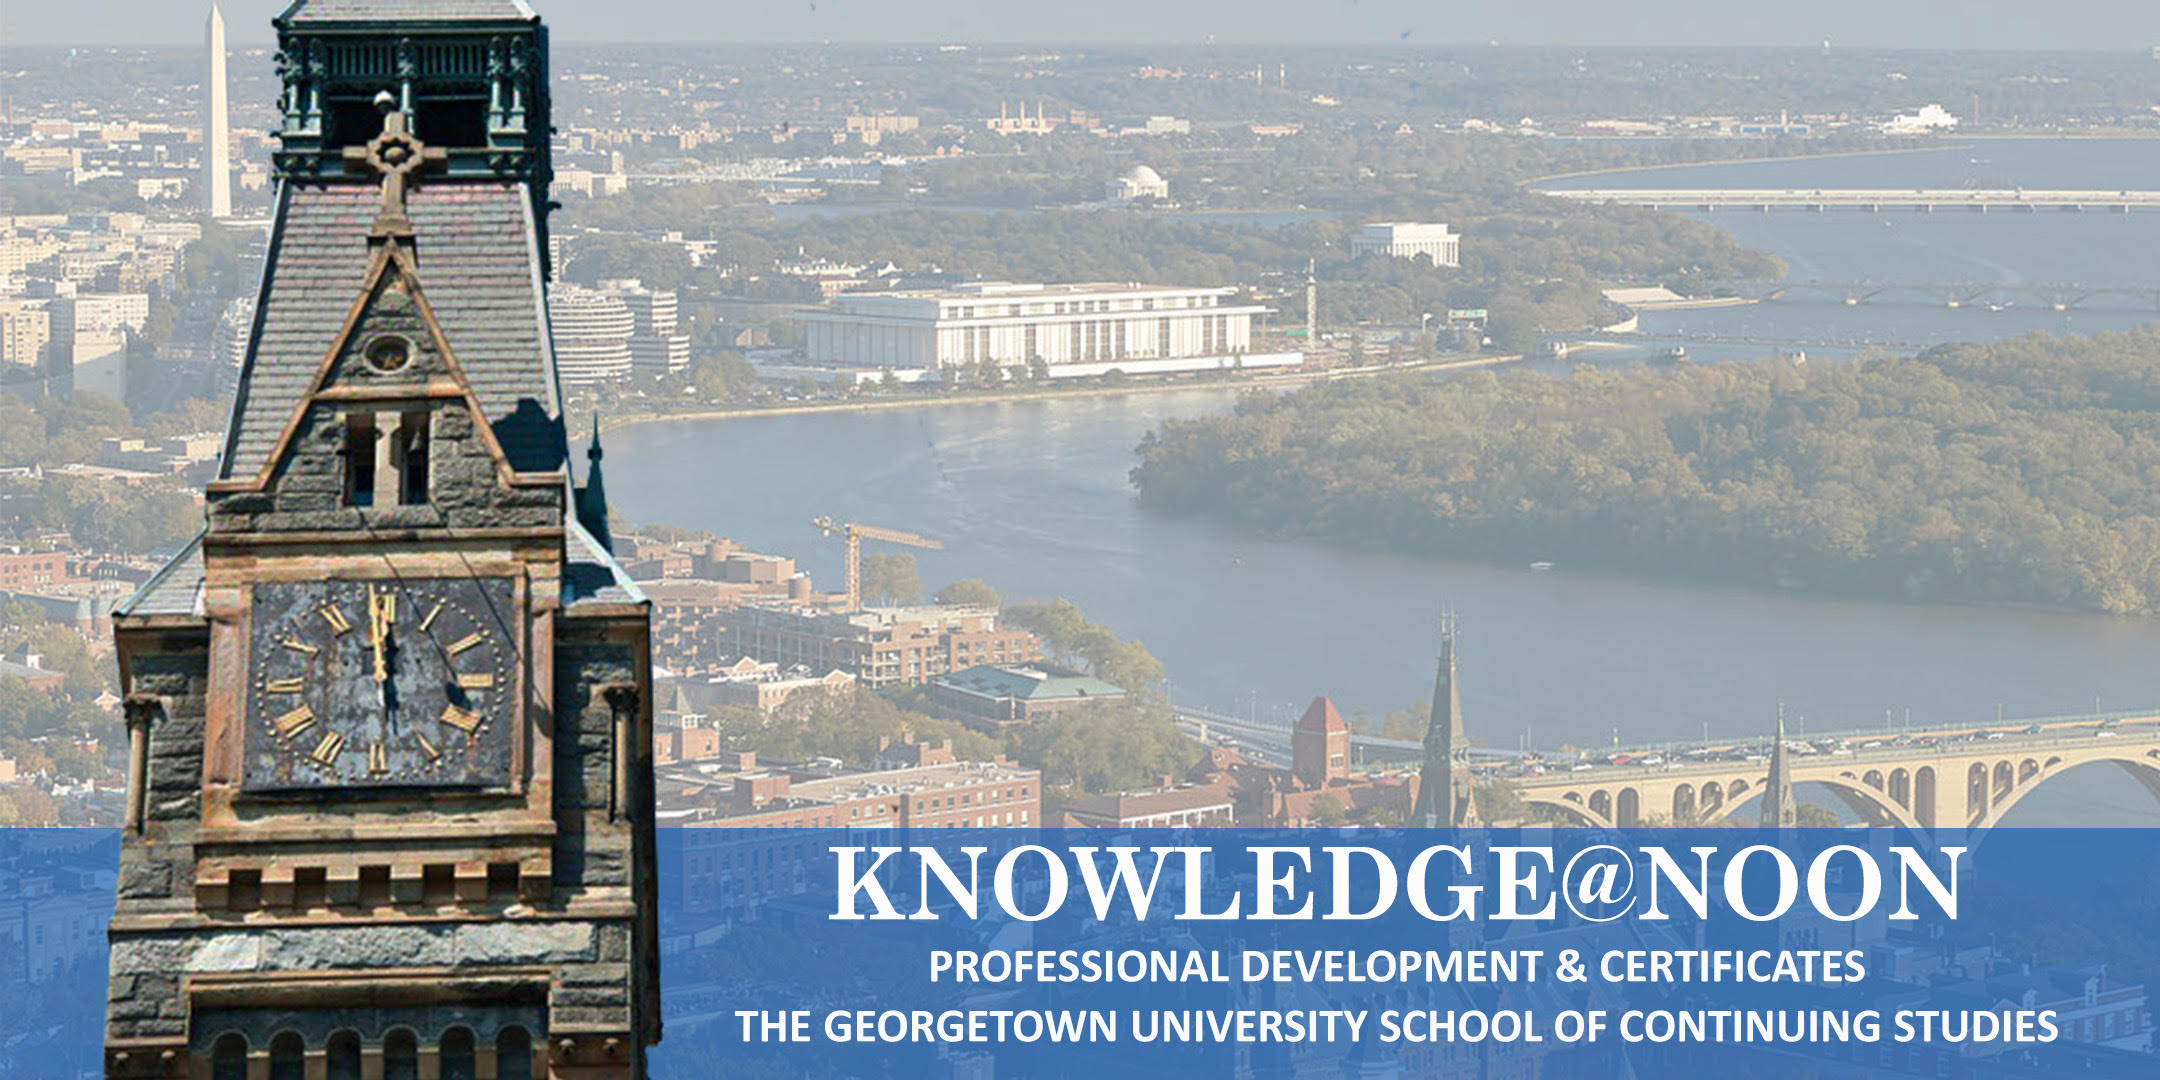 Healy Clocktower imposed above an aerial view of the Georgetown riverfront with text, "Knowledge@noon: Professional Development & Certificates, The Georgetown University School of Continuing Studies."